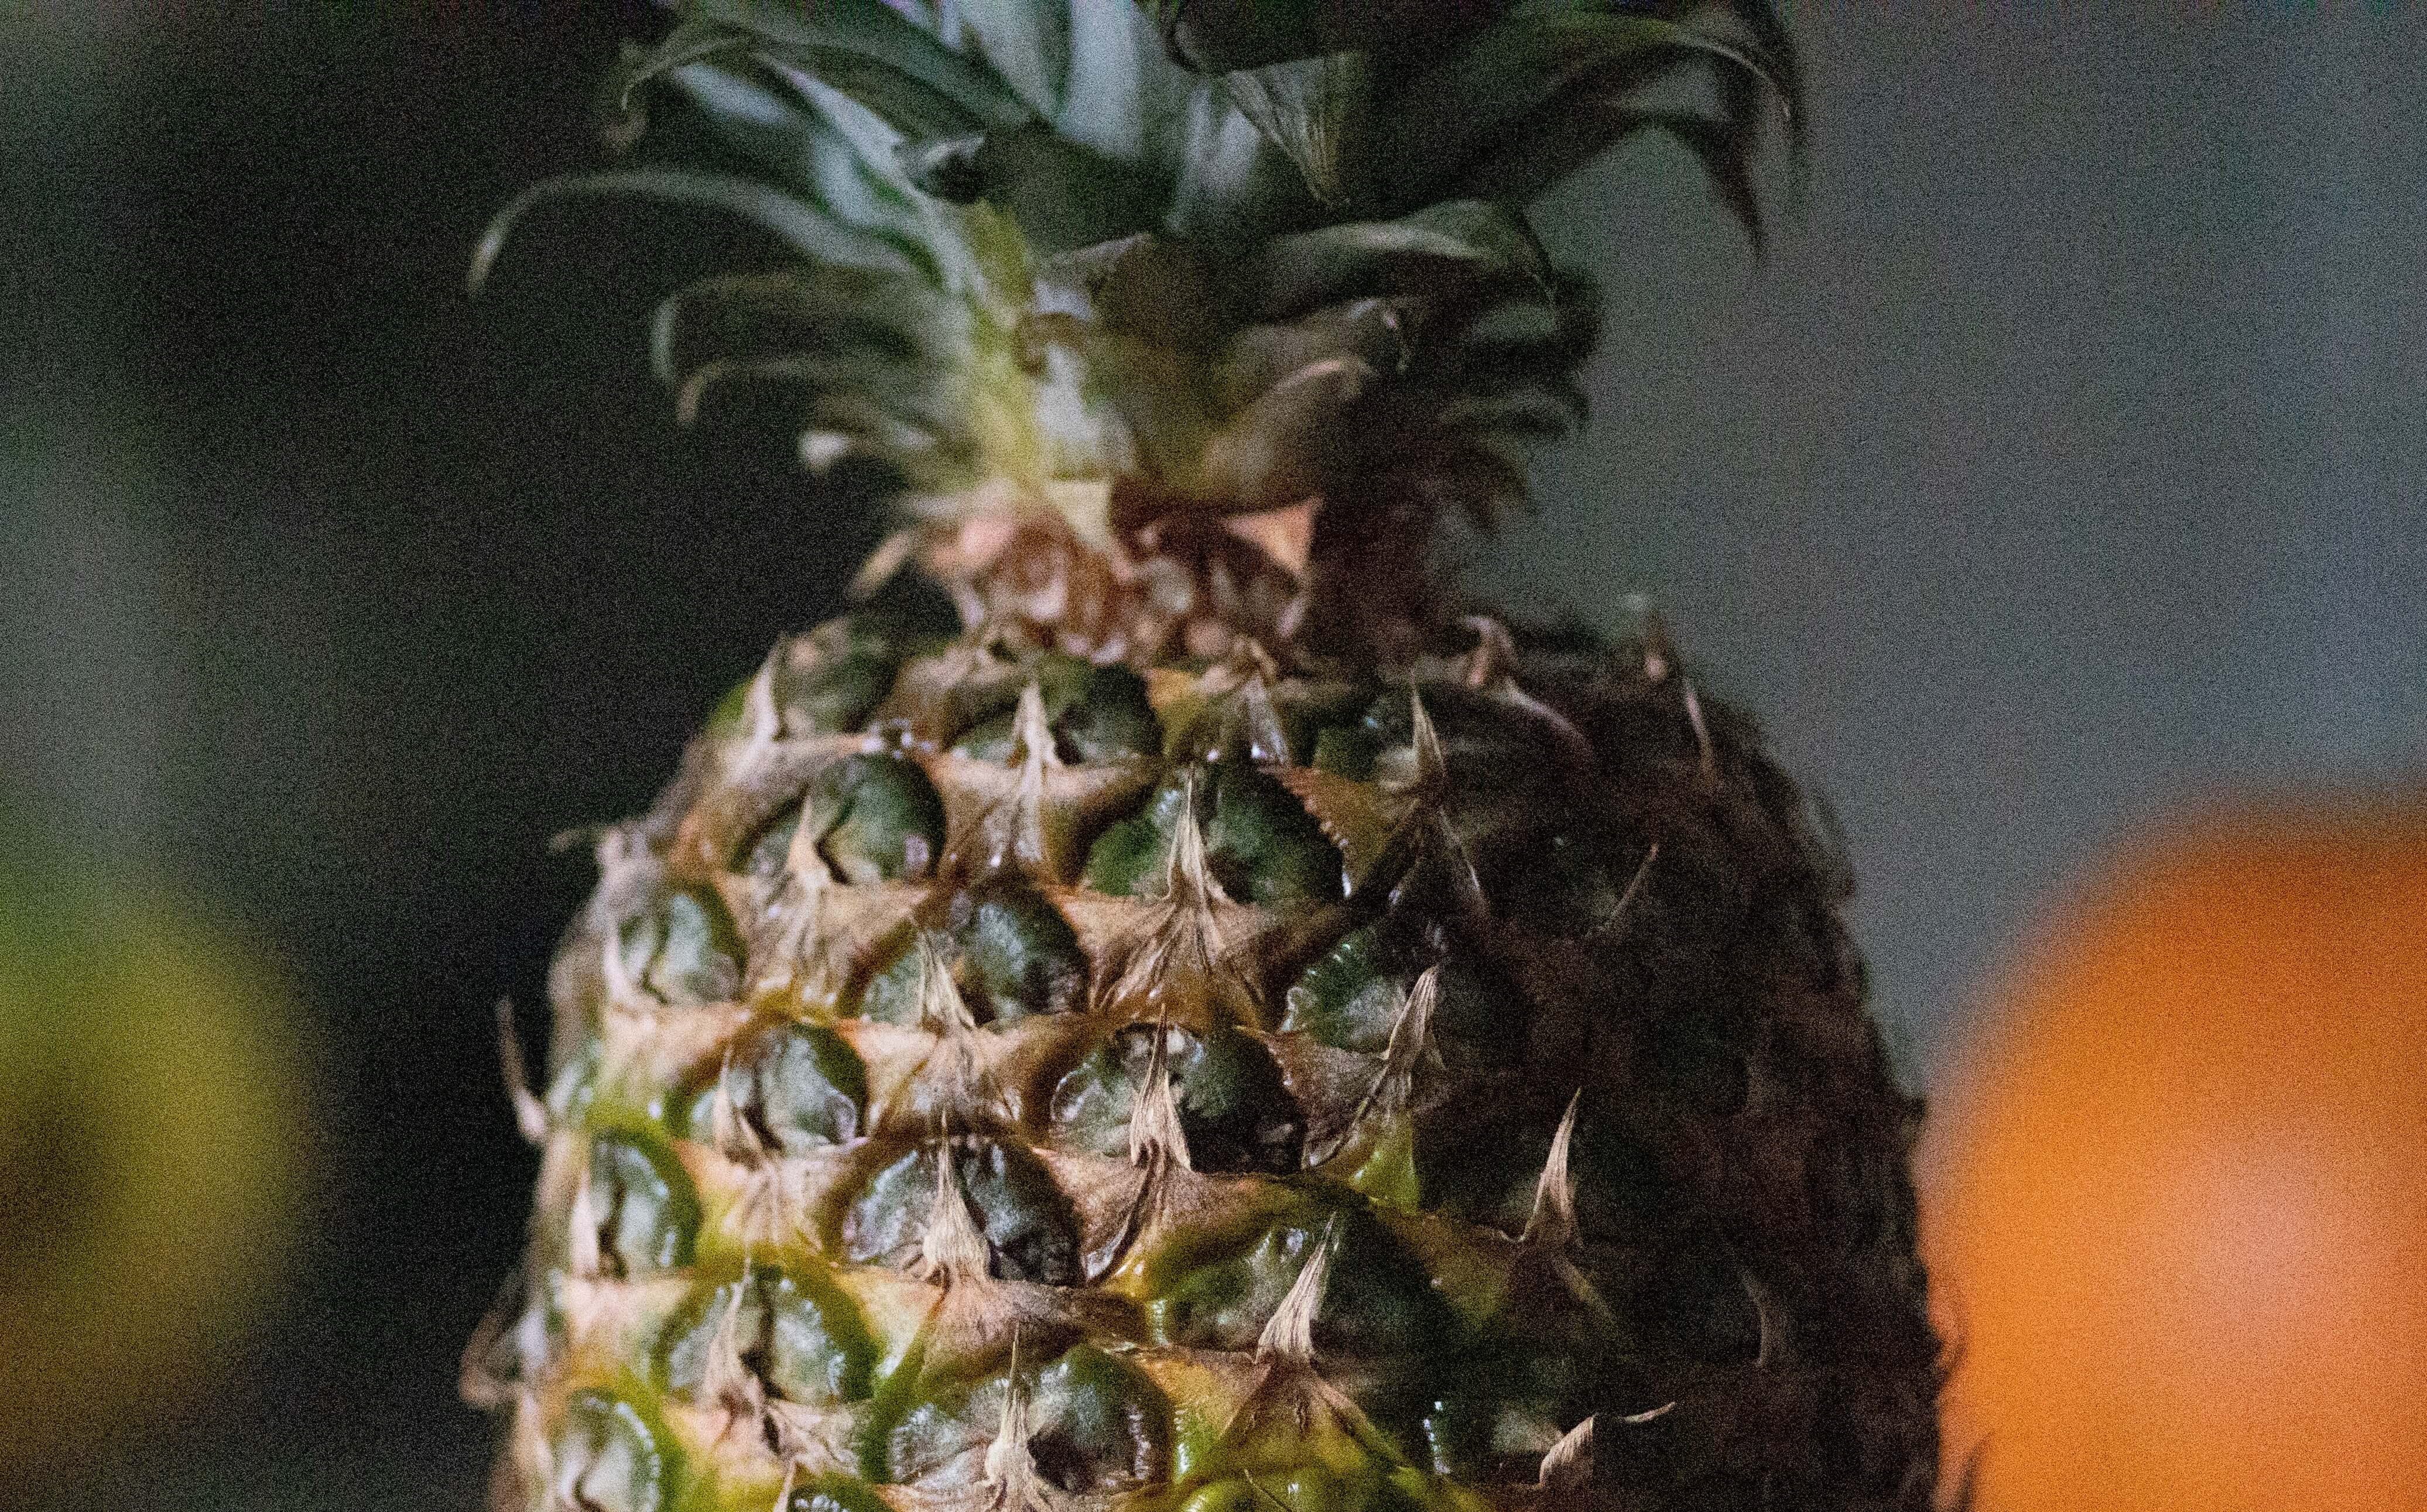 Displaying a pineapple with heavy grain due to using a really high ISO of 40,000